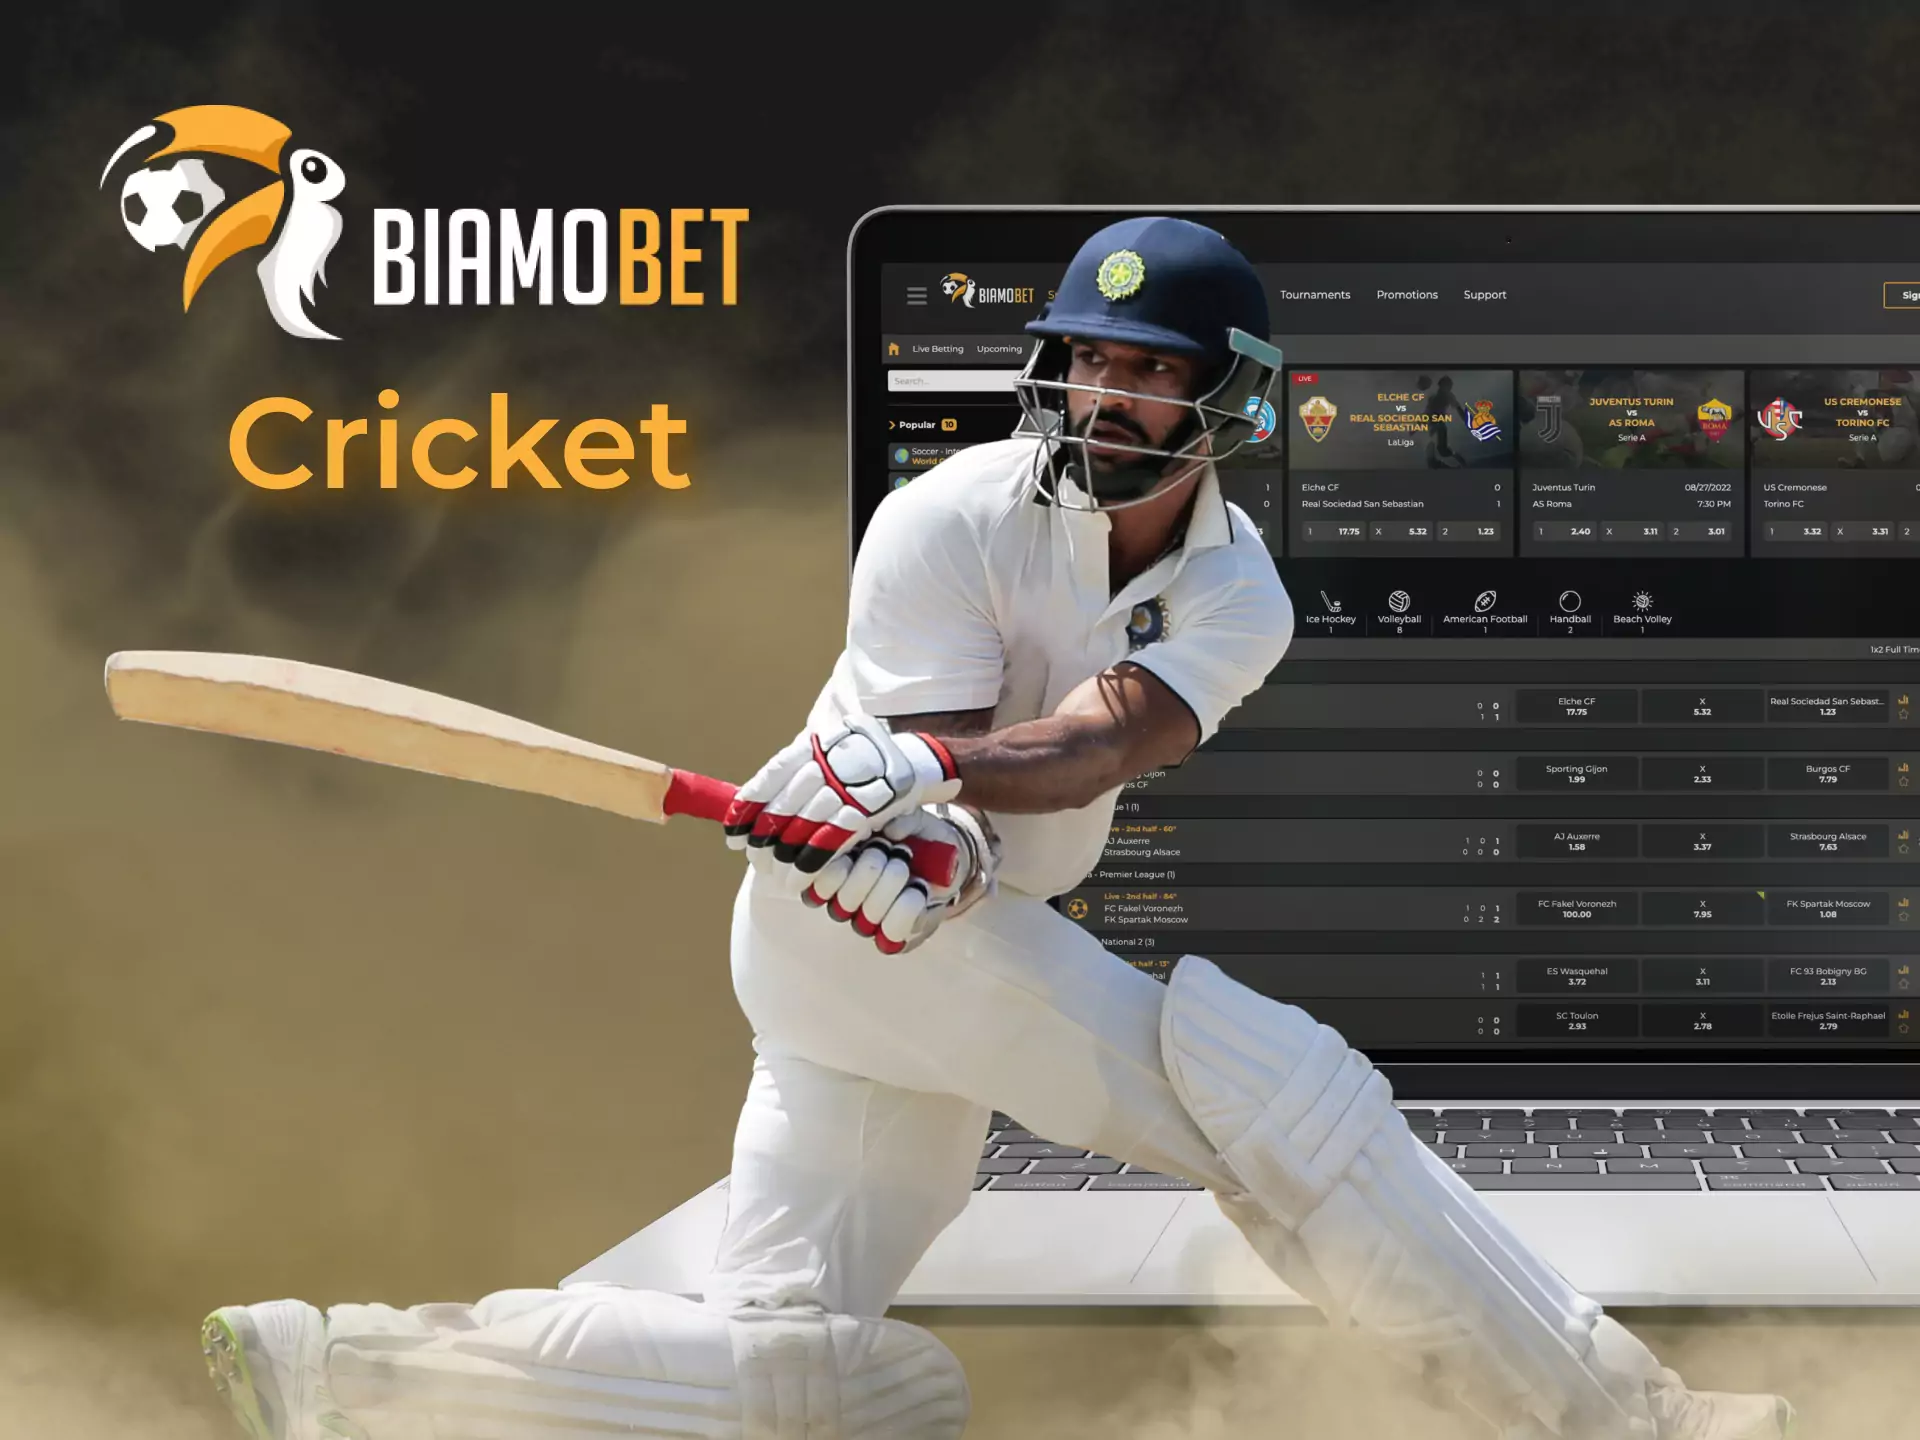 You can place a bet on cricket tournaments on Biamobet.